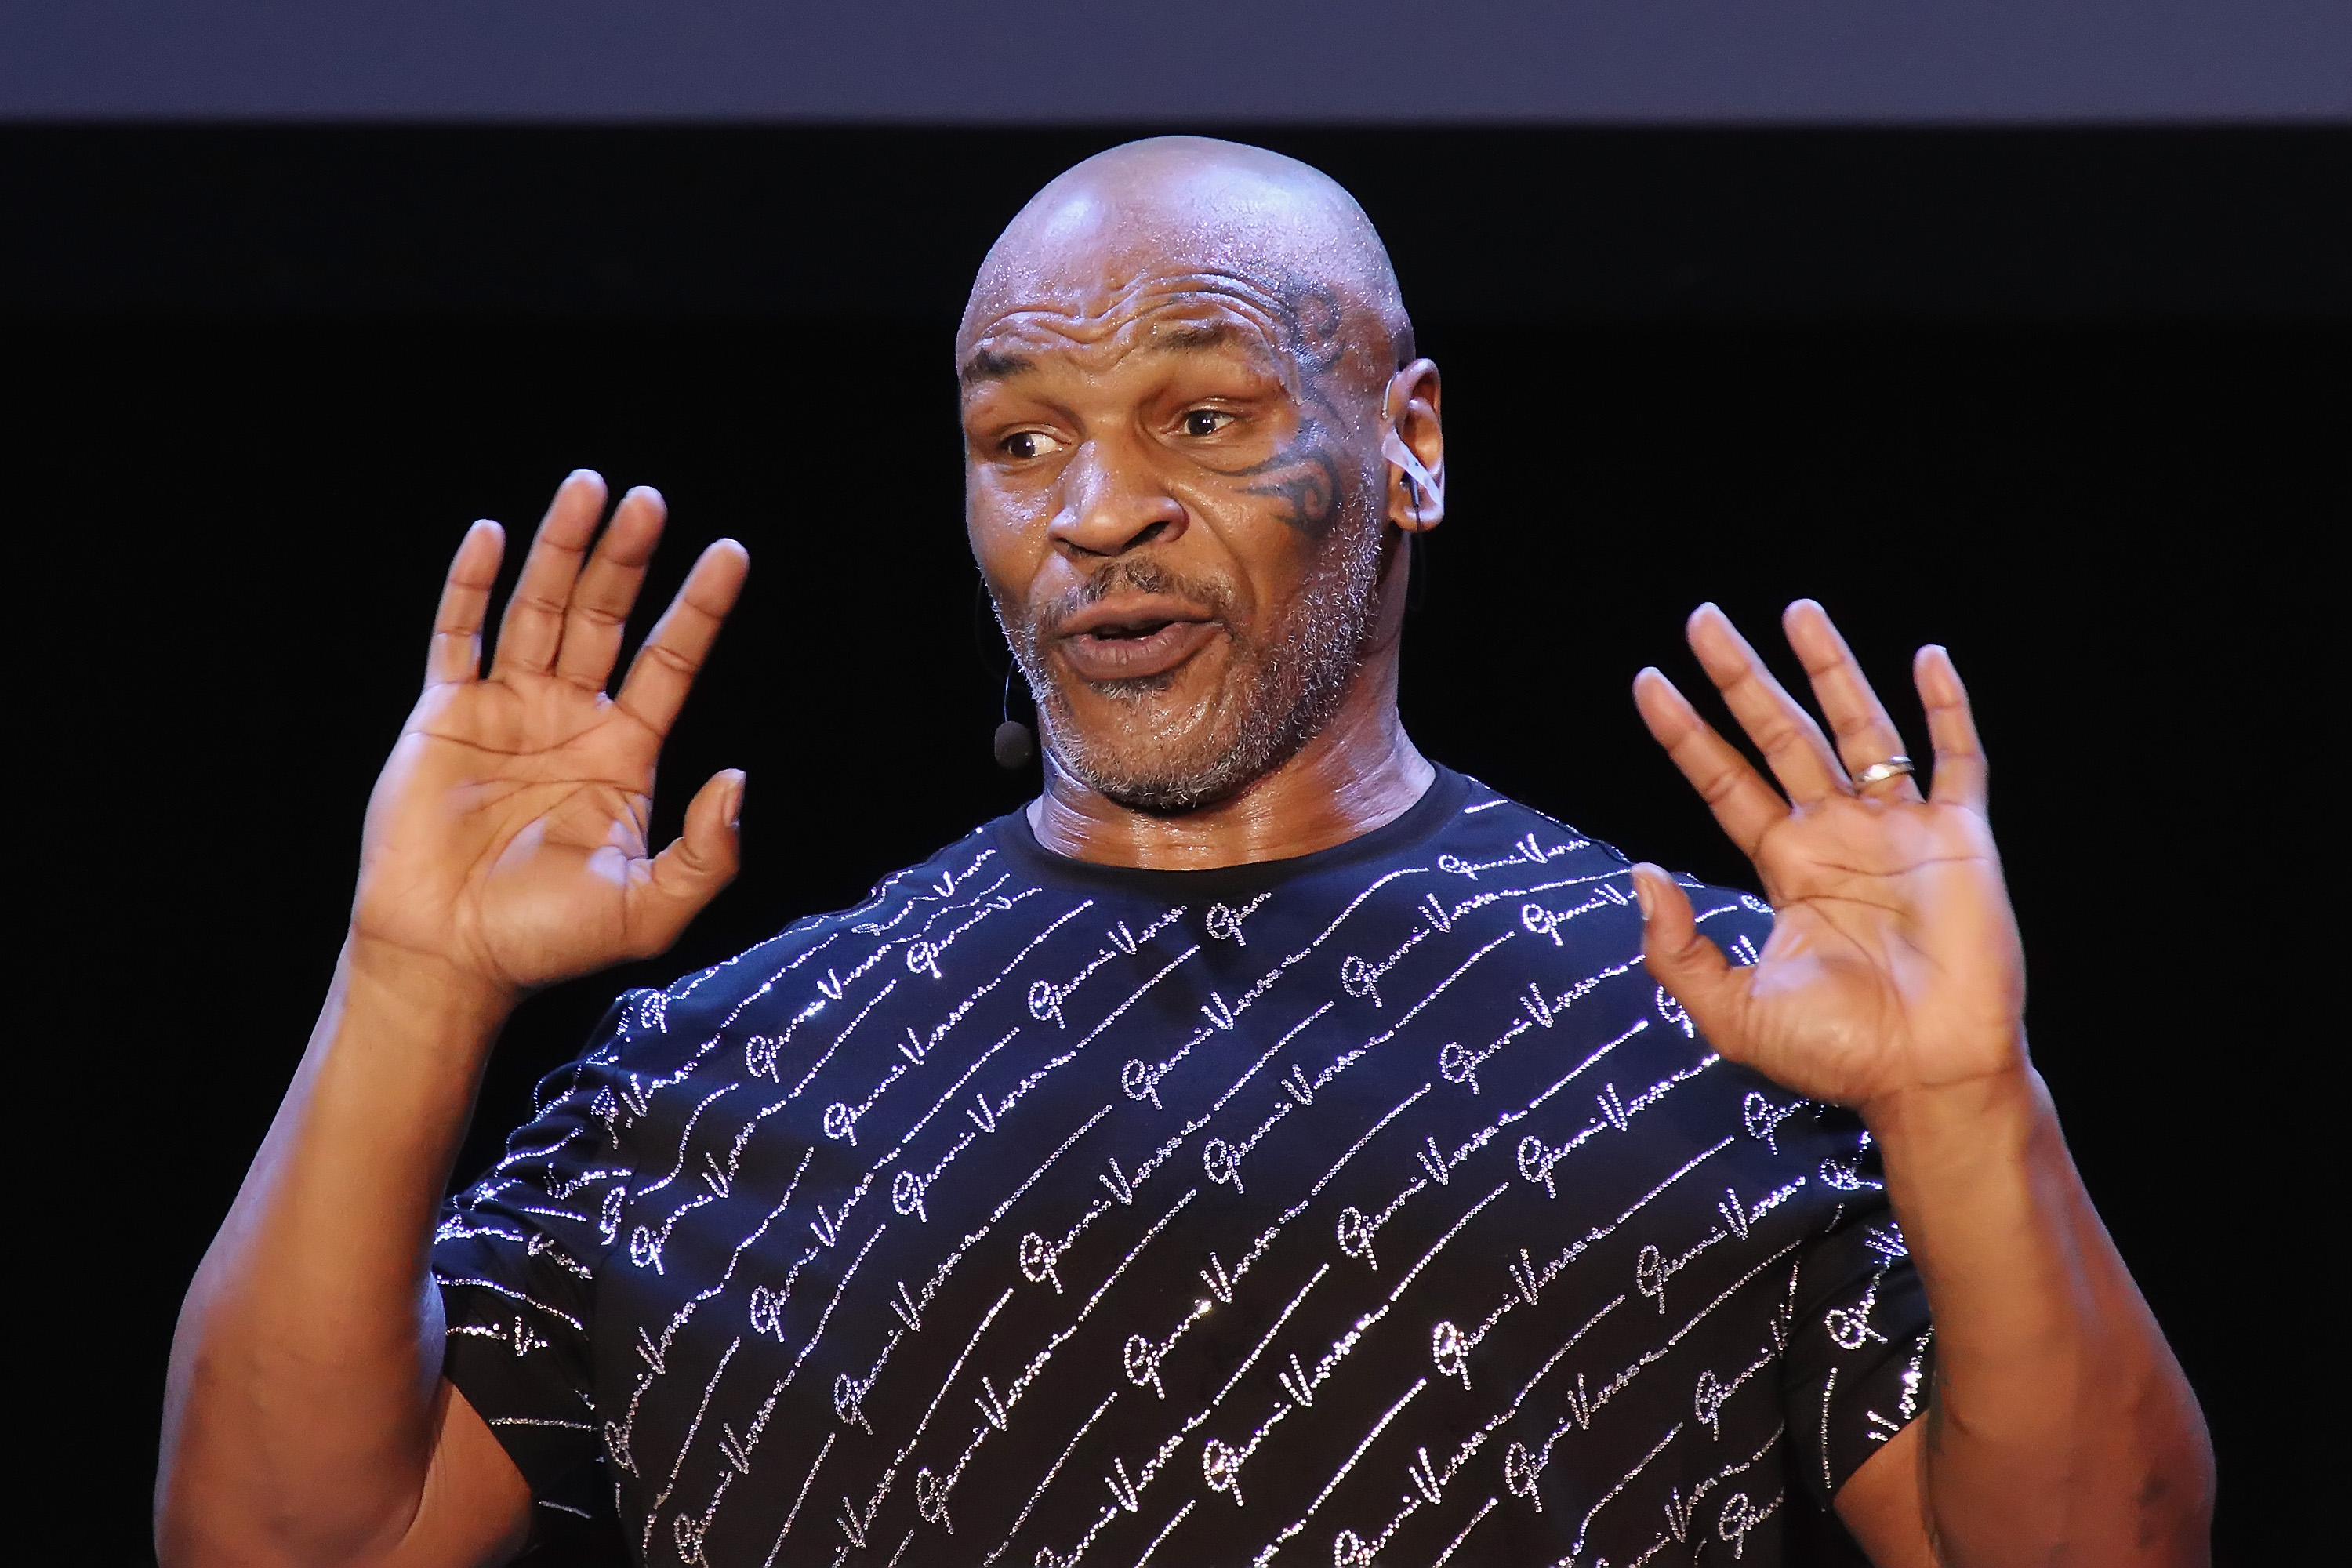 According to George Foreman, Mike Tyson's comeback could be motivated by 'temporary insanity'